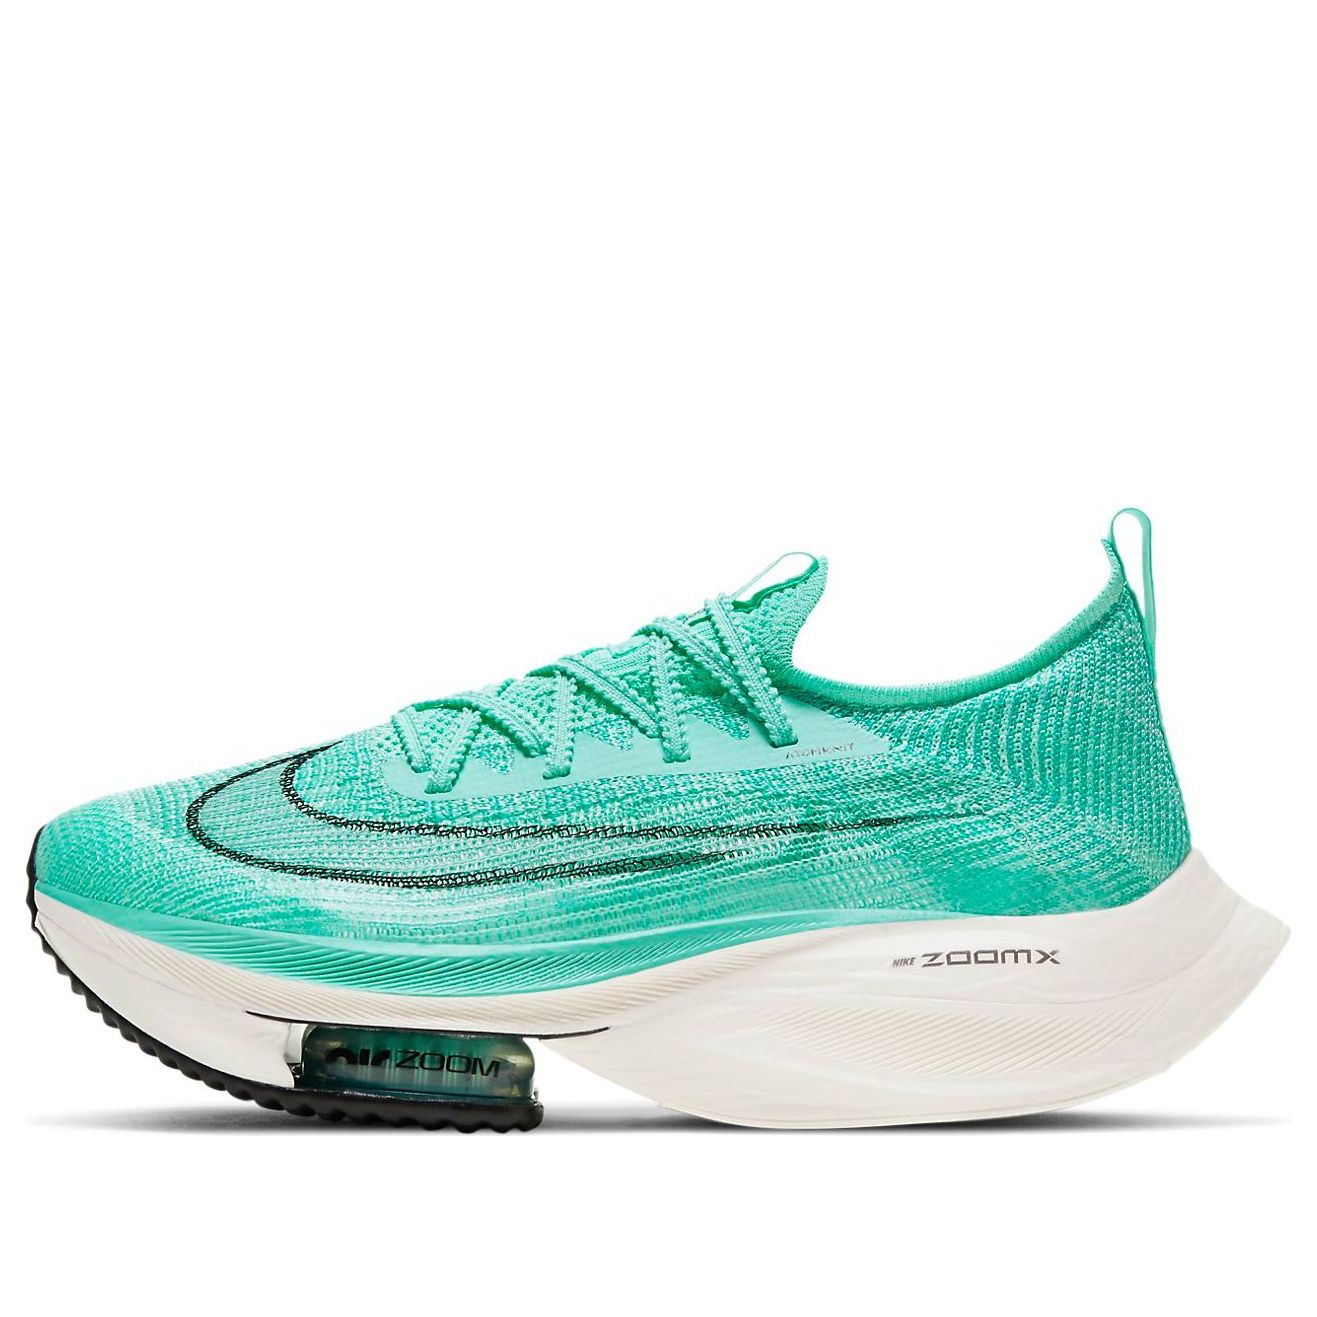 WMNS) Nike Air Zoom Alphafly NEXT% 'Hyper Turquoise' CZ1514-300